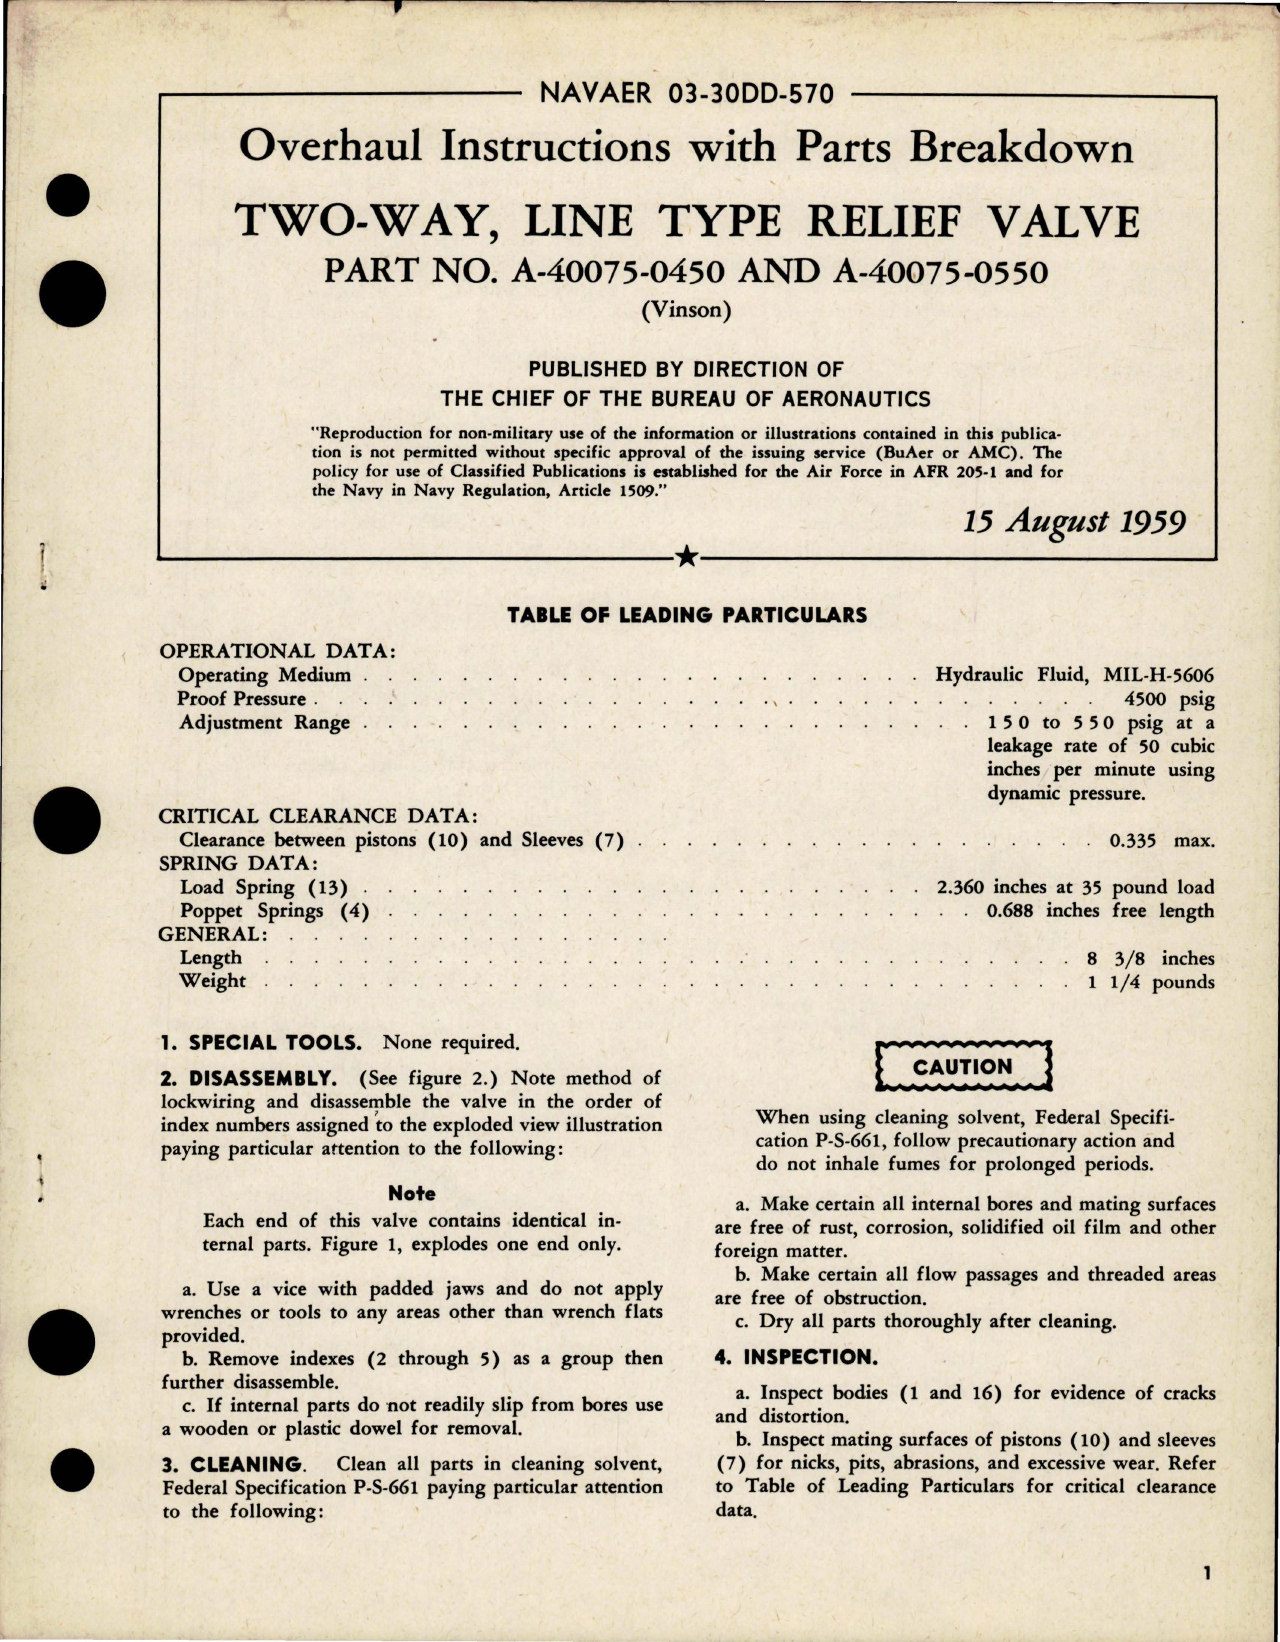 Sample page 1 from AirCorps Library document: Overhaul Instructions with Parts for Two-Way, Line Type Relief Valve - Part A-40075-0450 and A-40075-0550 